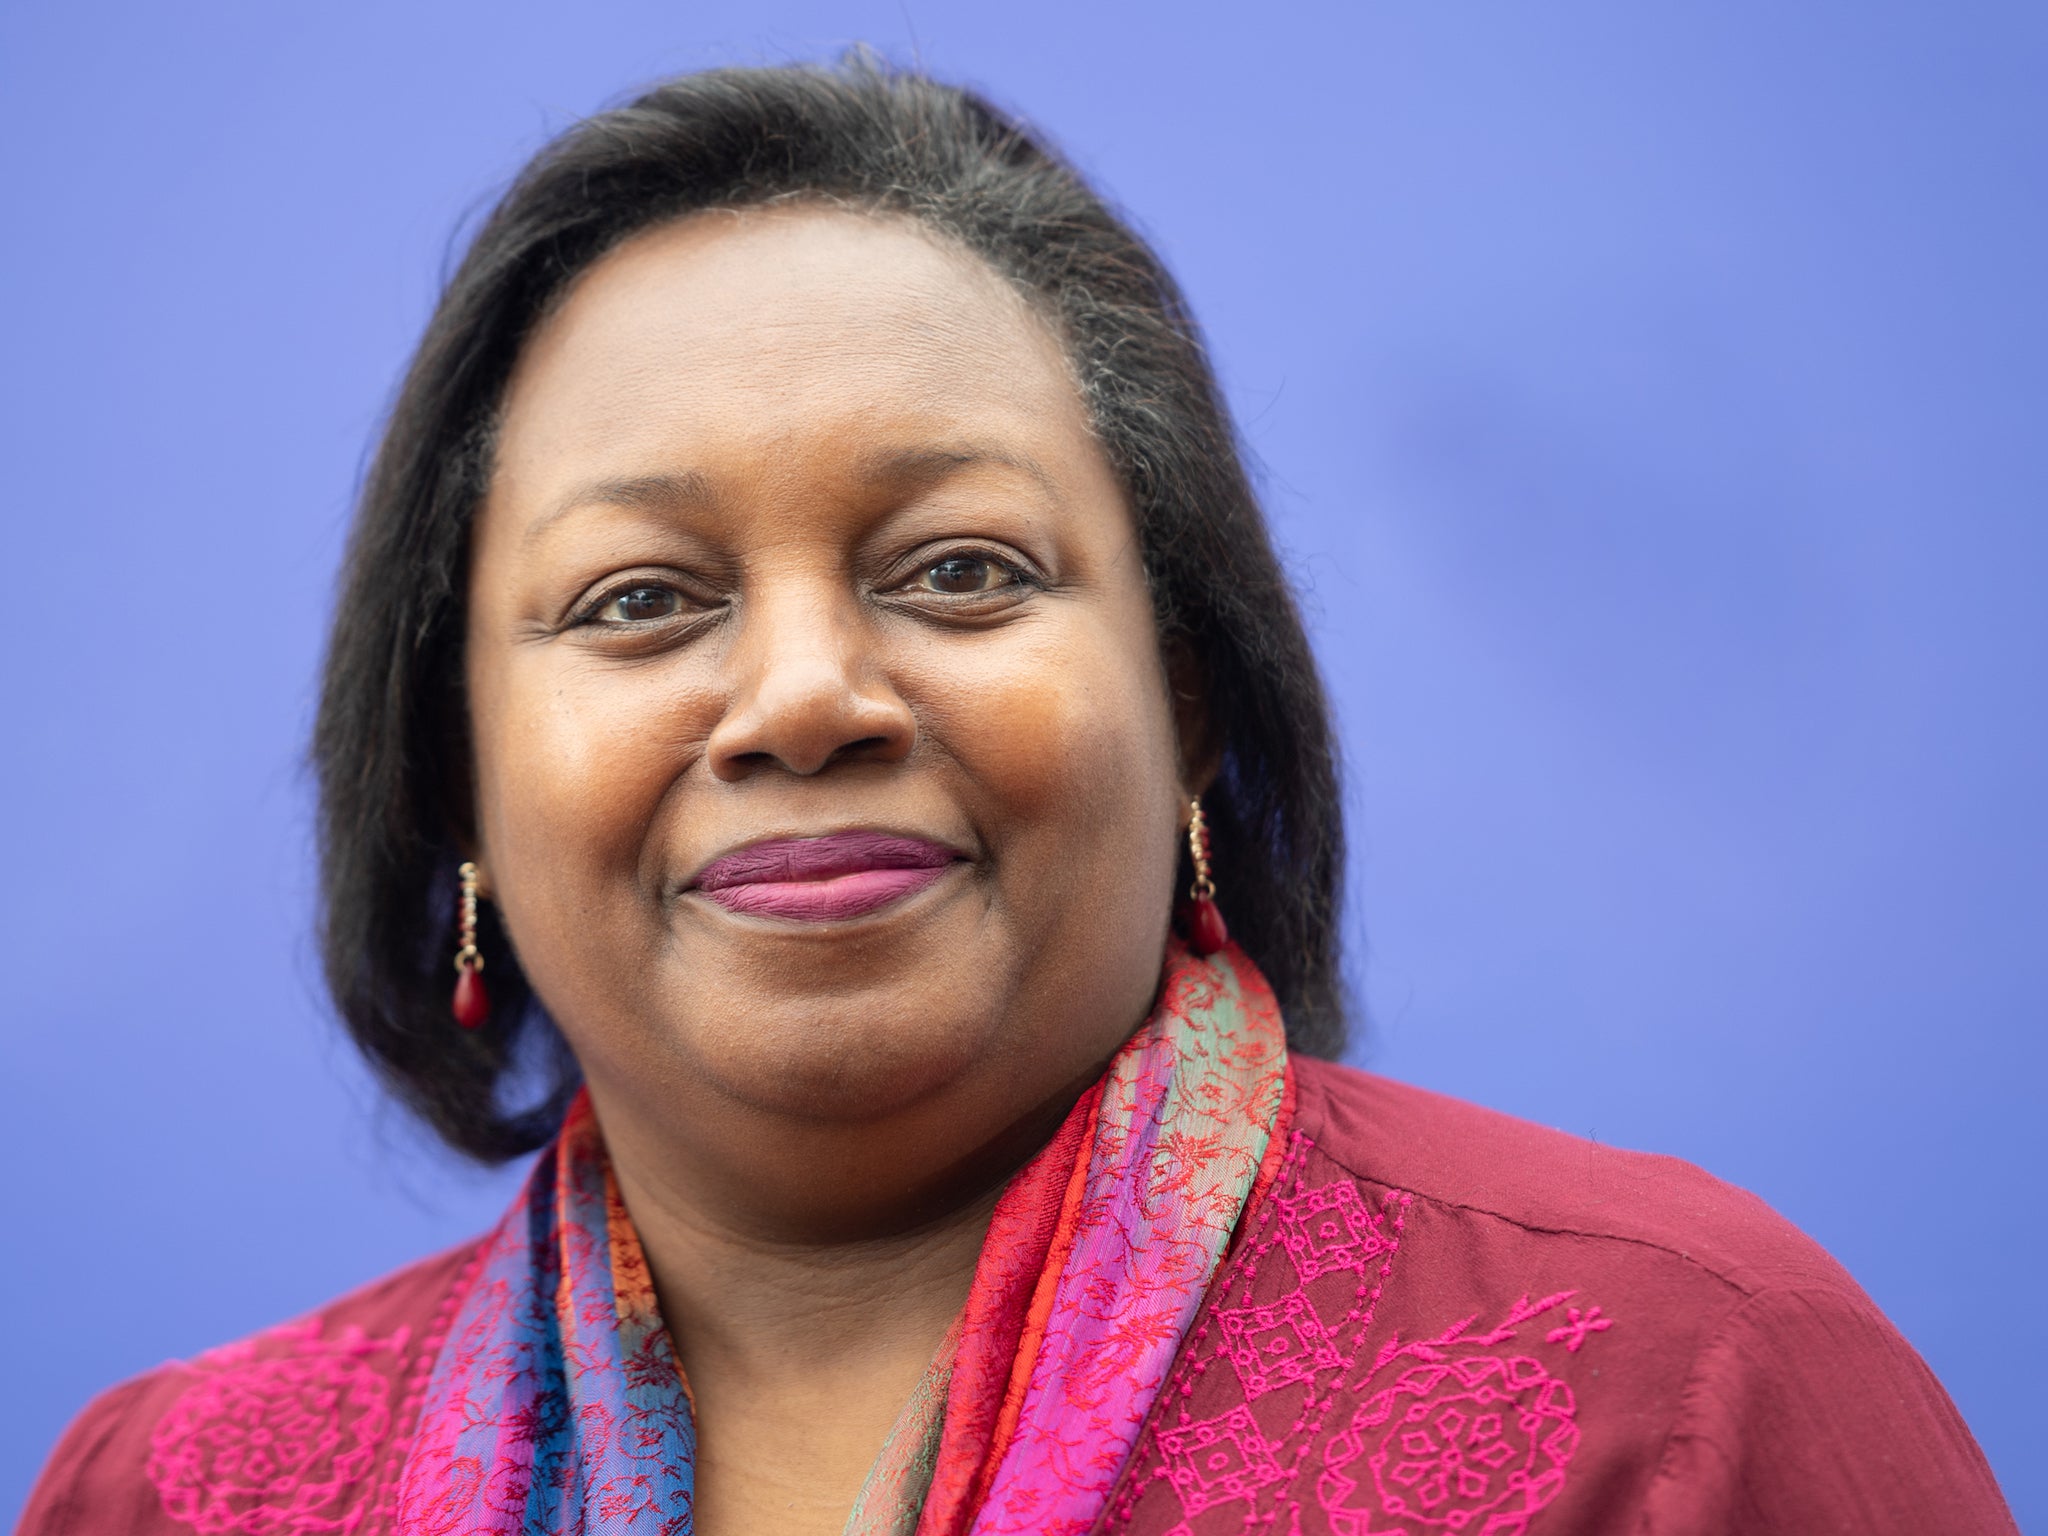 Malorie Blackman’s applauded Noughts and Crosses novels continue to be read as part of school curriculums across the country